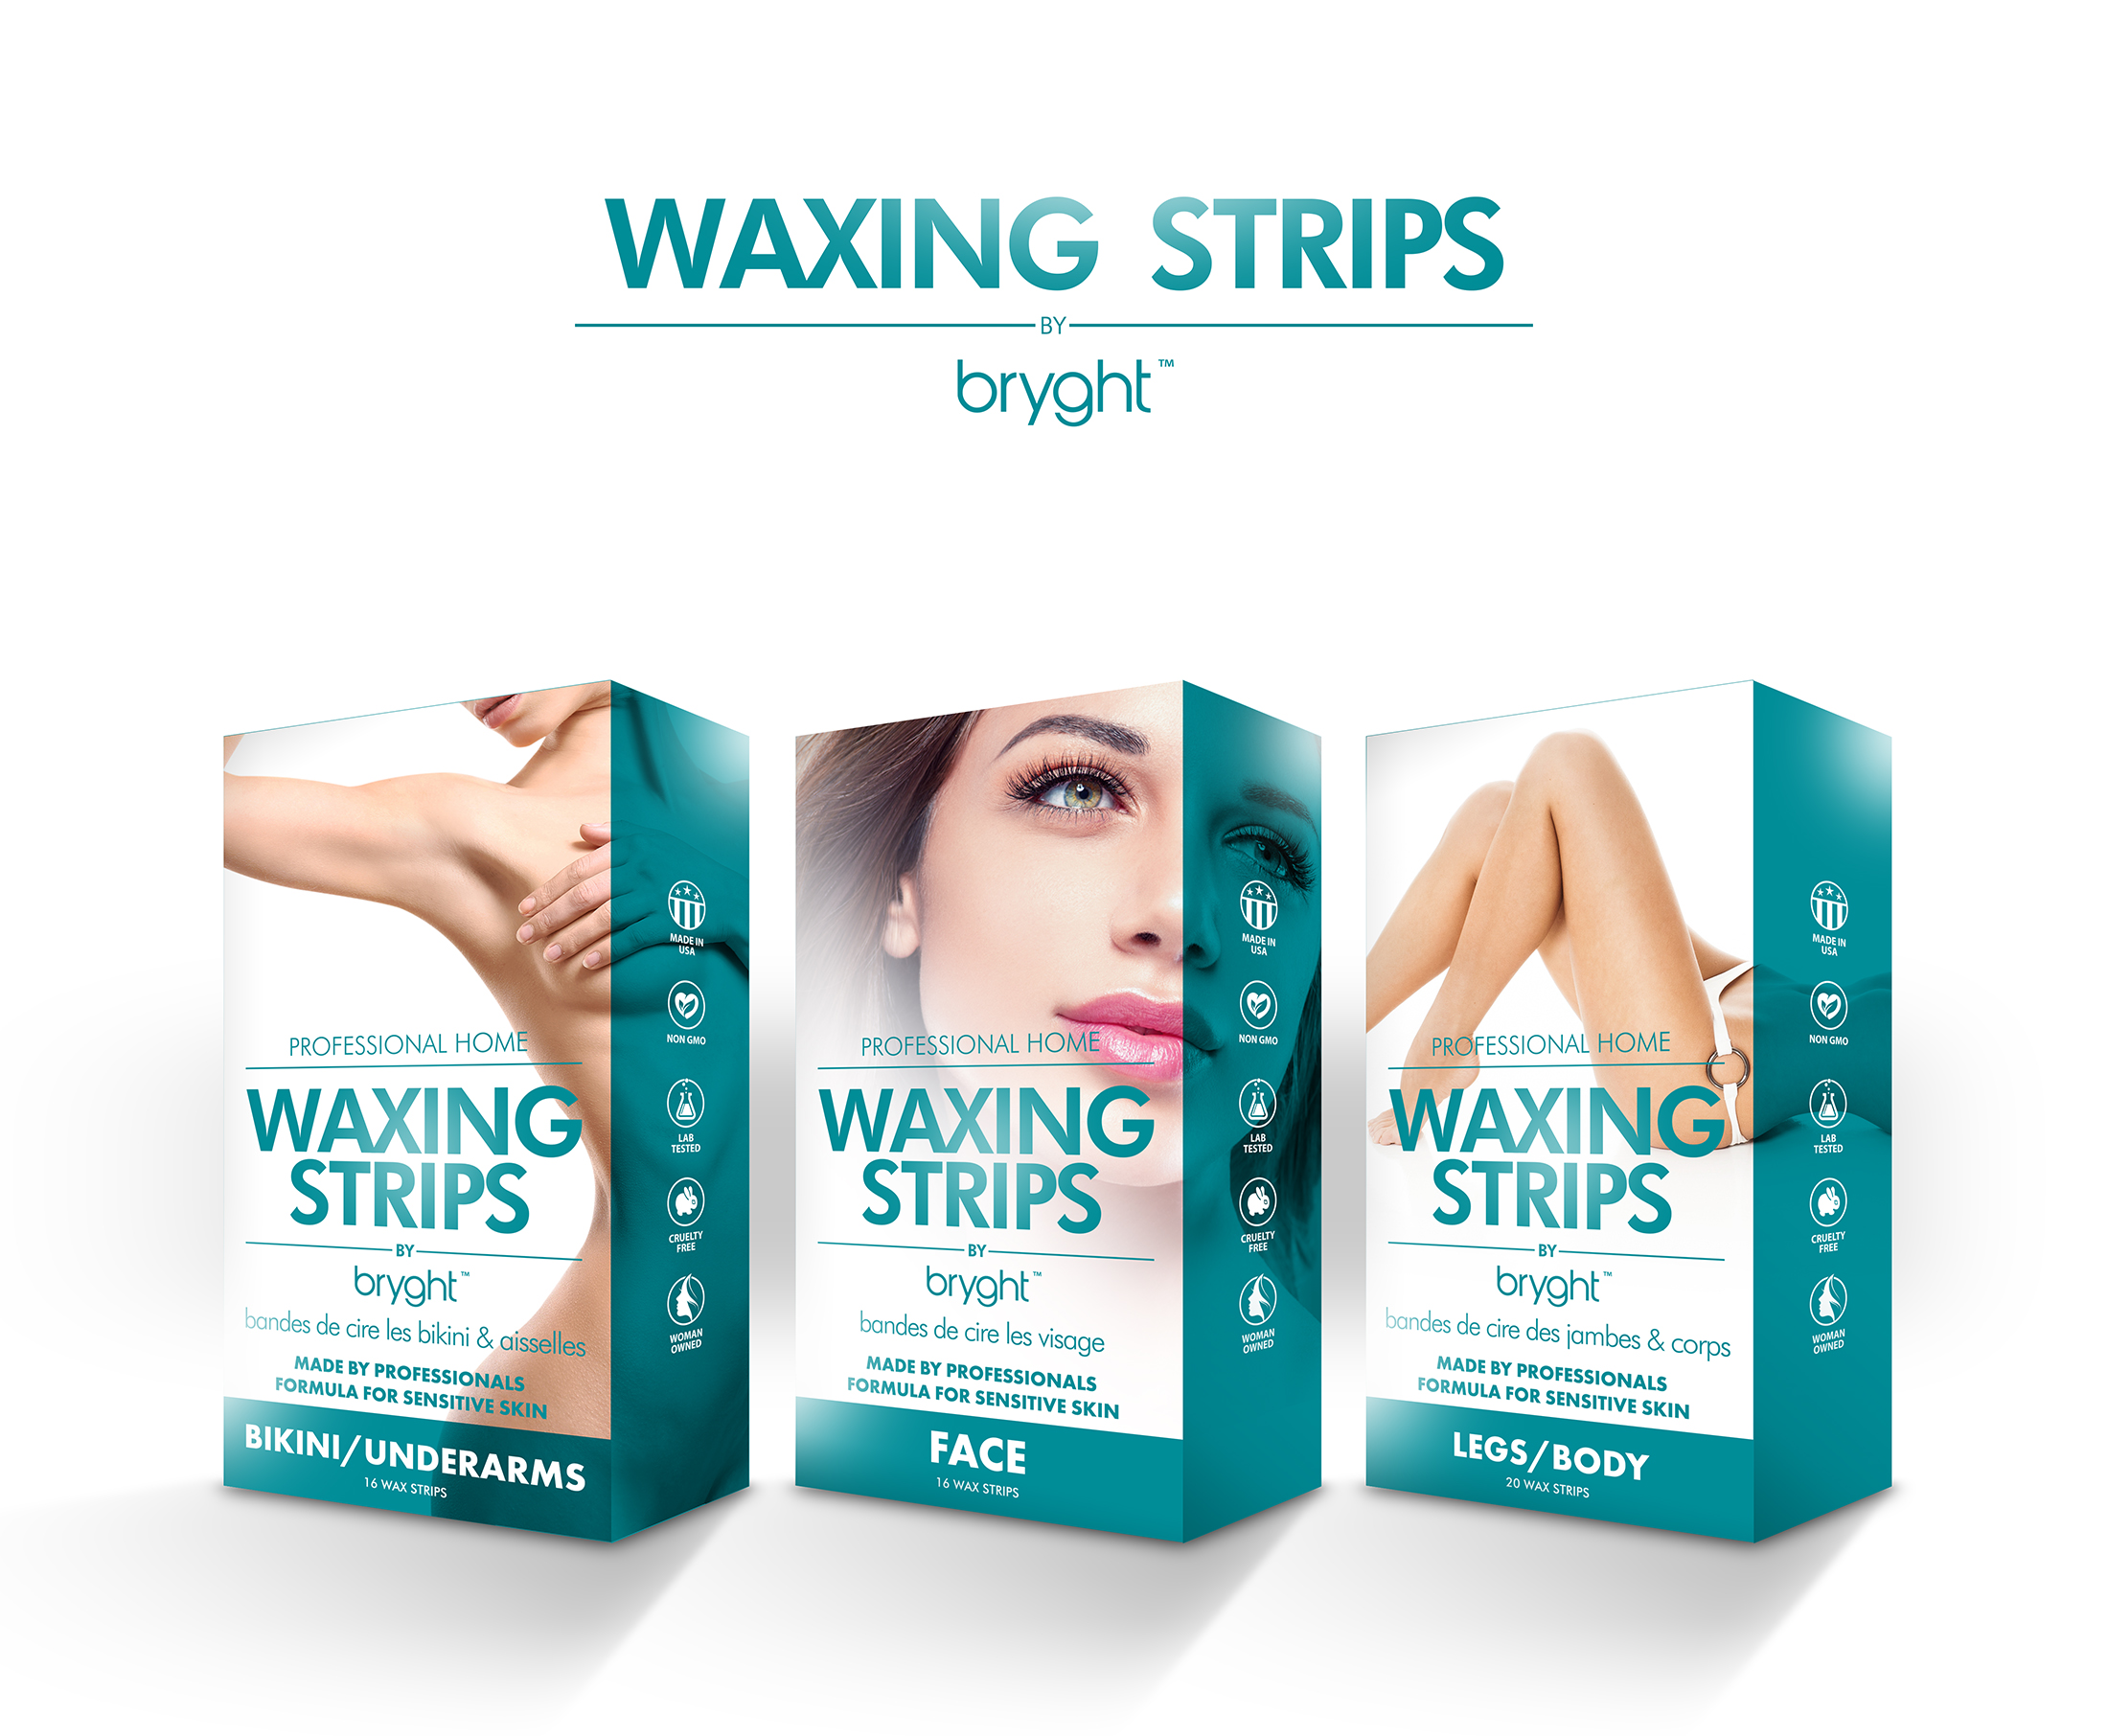 bryght waxing strips